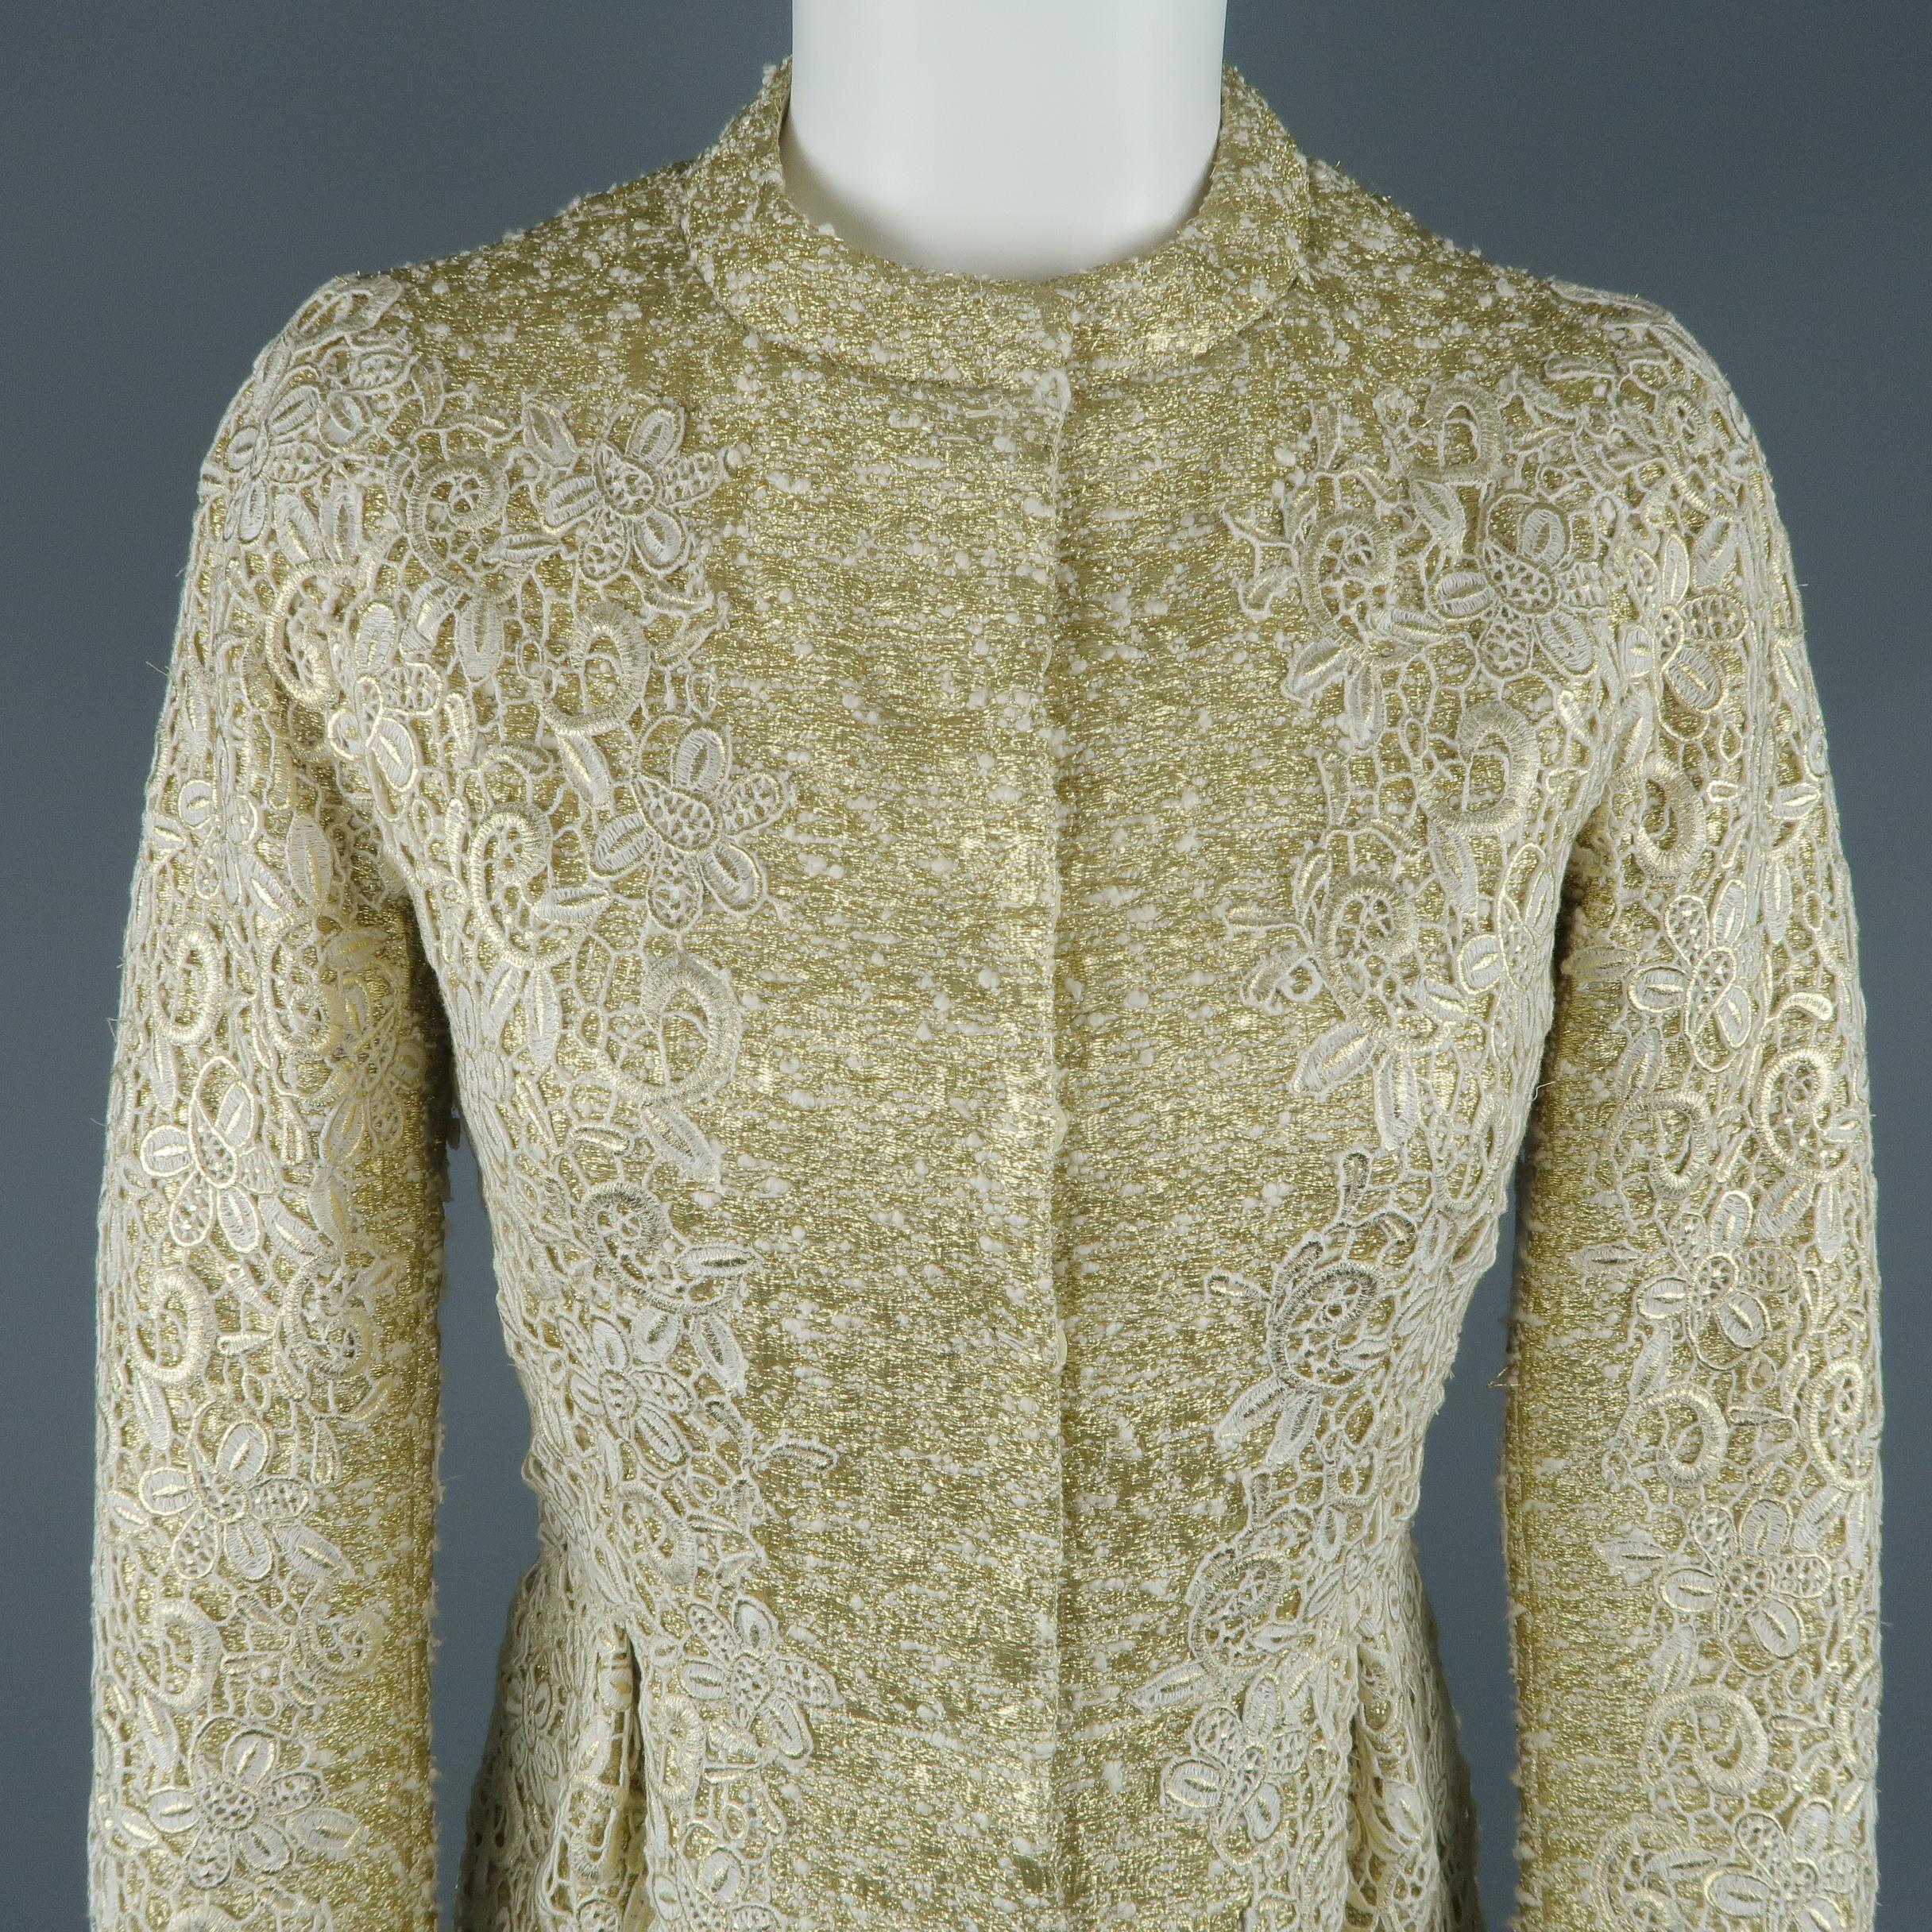 GIAMBATTISTA VALLI cocktail dress comes in a thick metallic gold tweed with a crew neck, hidden placket snap closure front, pleated pencil skirt, long sleeves, and overall cream lace overlay. Made in Italy.
 
Excellent Pre-Owned Condition.
Marked: